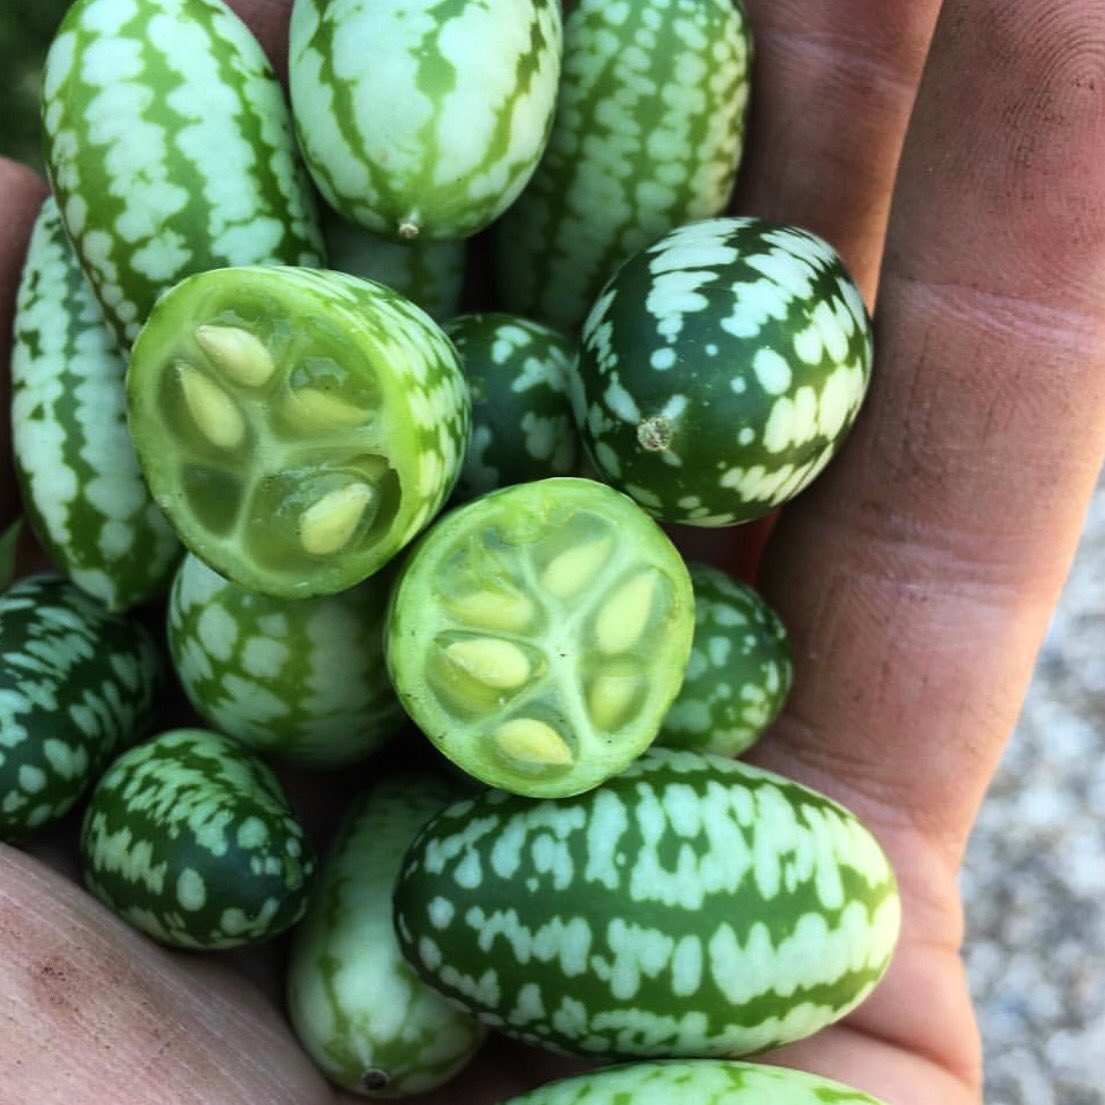 Cucamelons 🥒 They look like watermelon, they taste like cucumber! 

From the kitchen garden at THE PIG-at Combe, shot by head gardener @Alscoutts #devon #piggythings